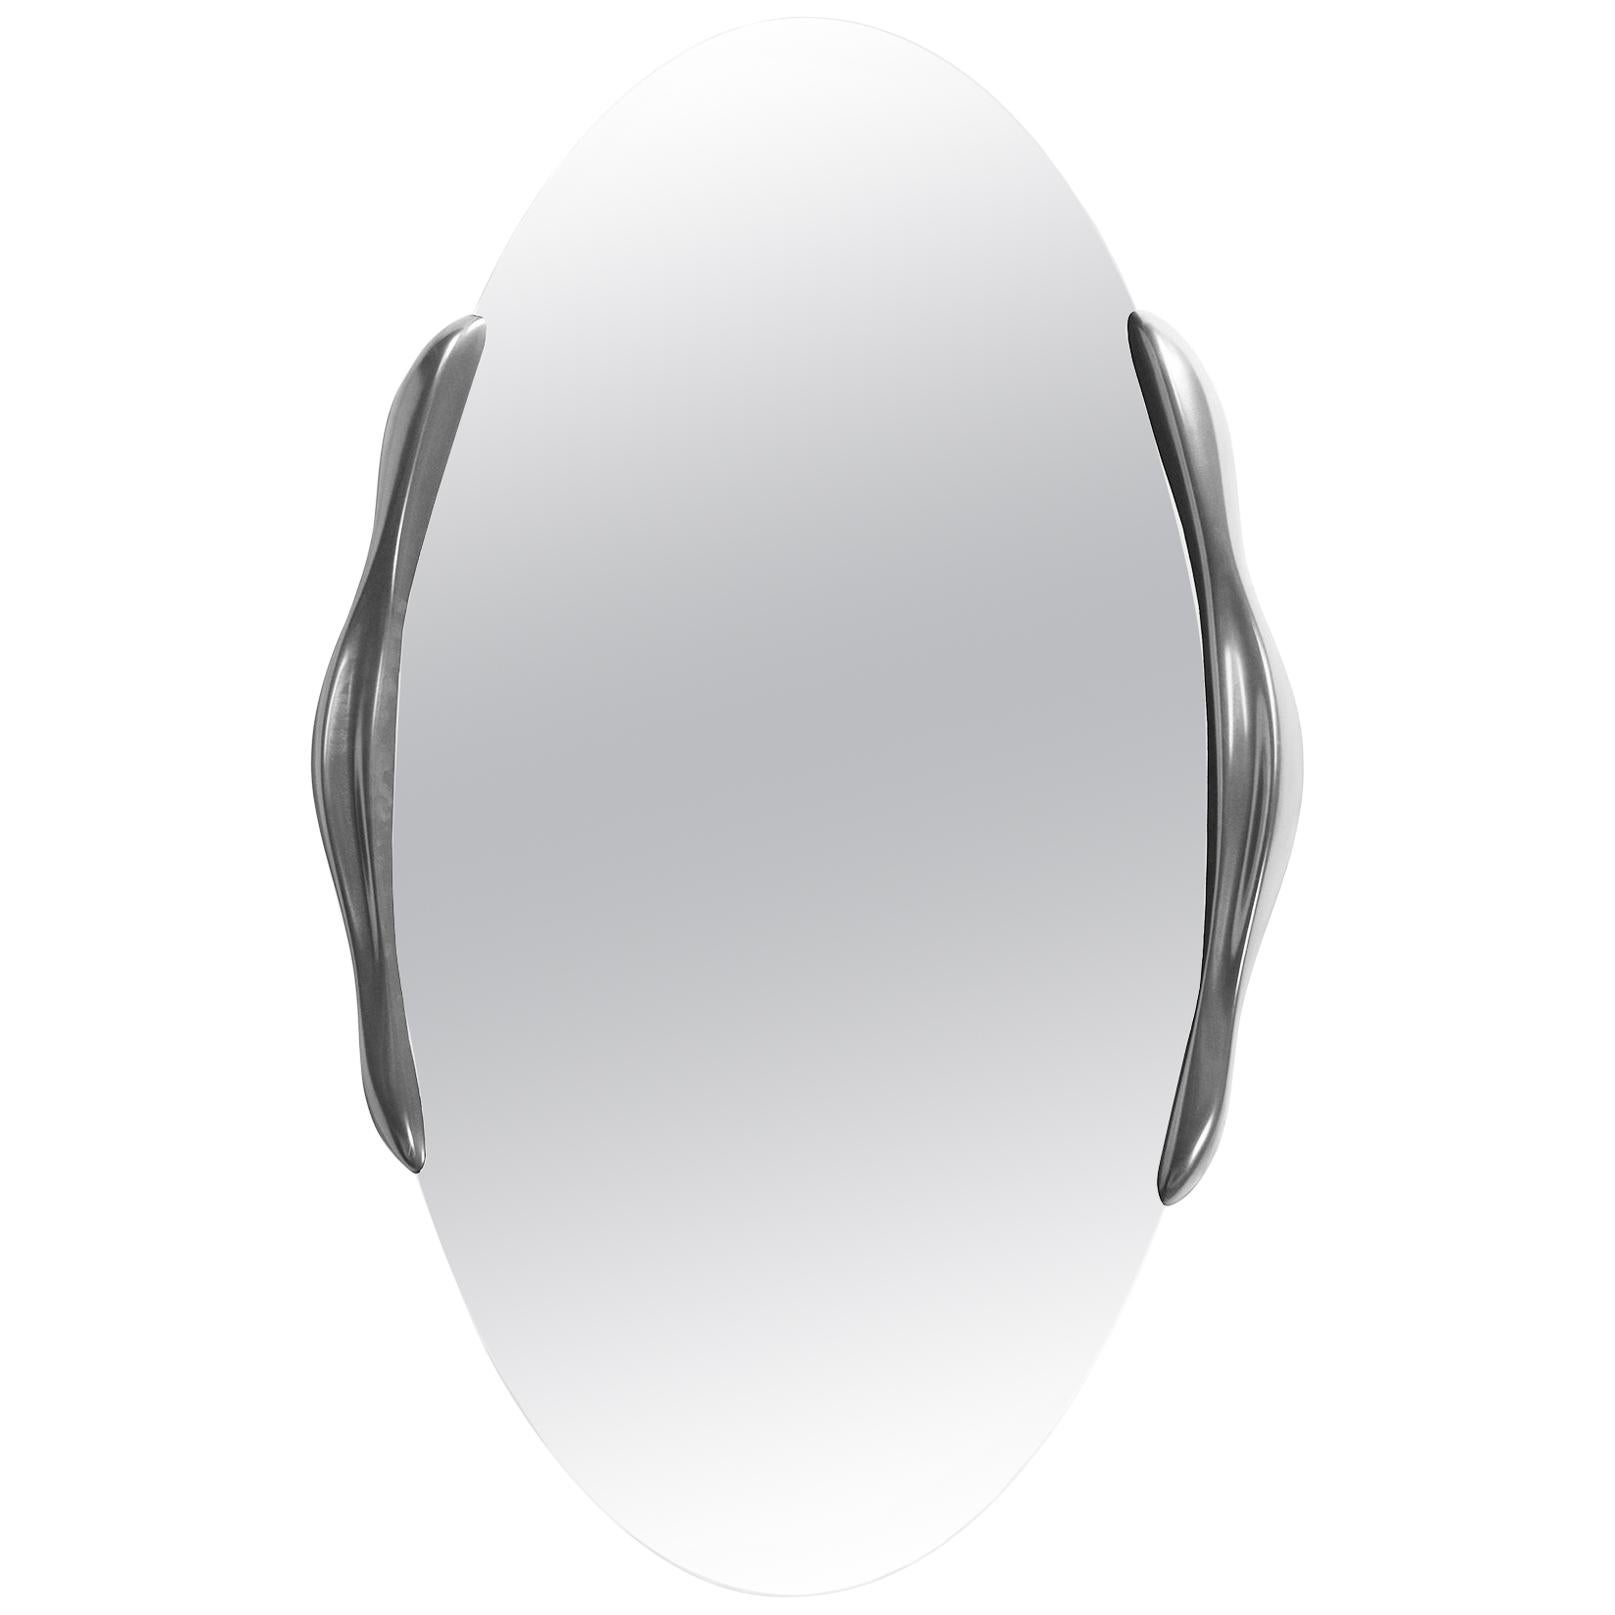 Amorph Ovate Modern Mirror in Stainless Steel Finish